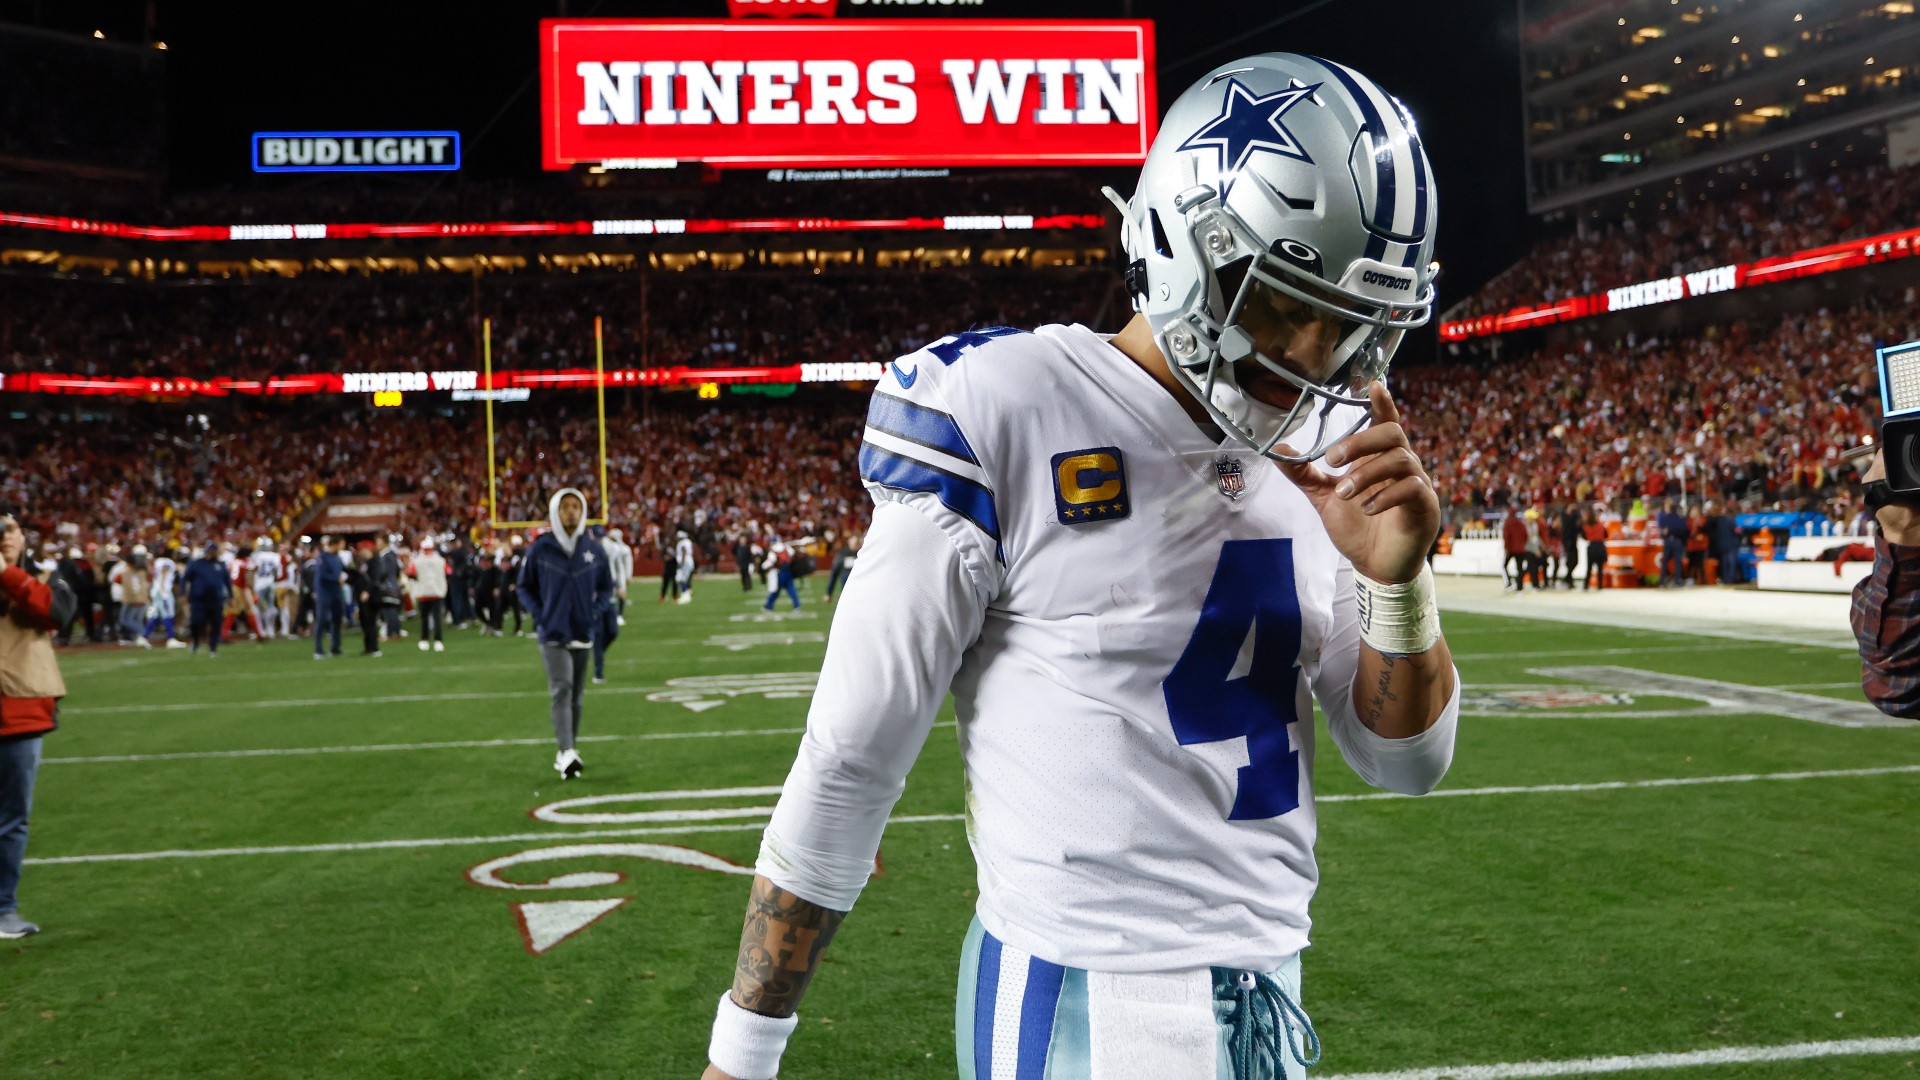 Dak Prescott is good enough to silence all his critics one week in Tampa Bay, but also capable of throwing gas right back on the fire six days later.